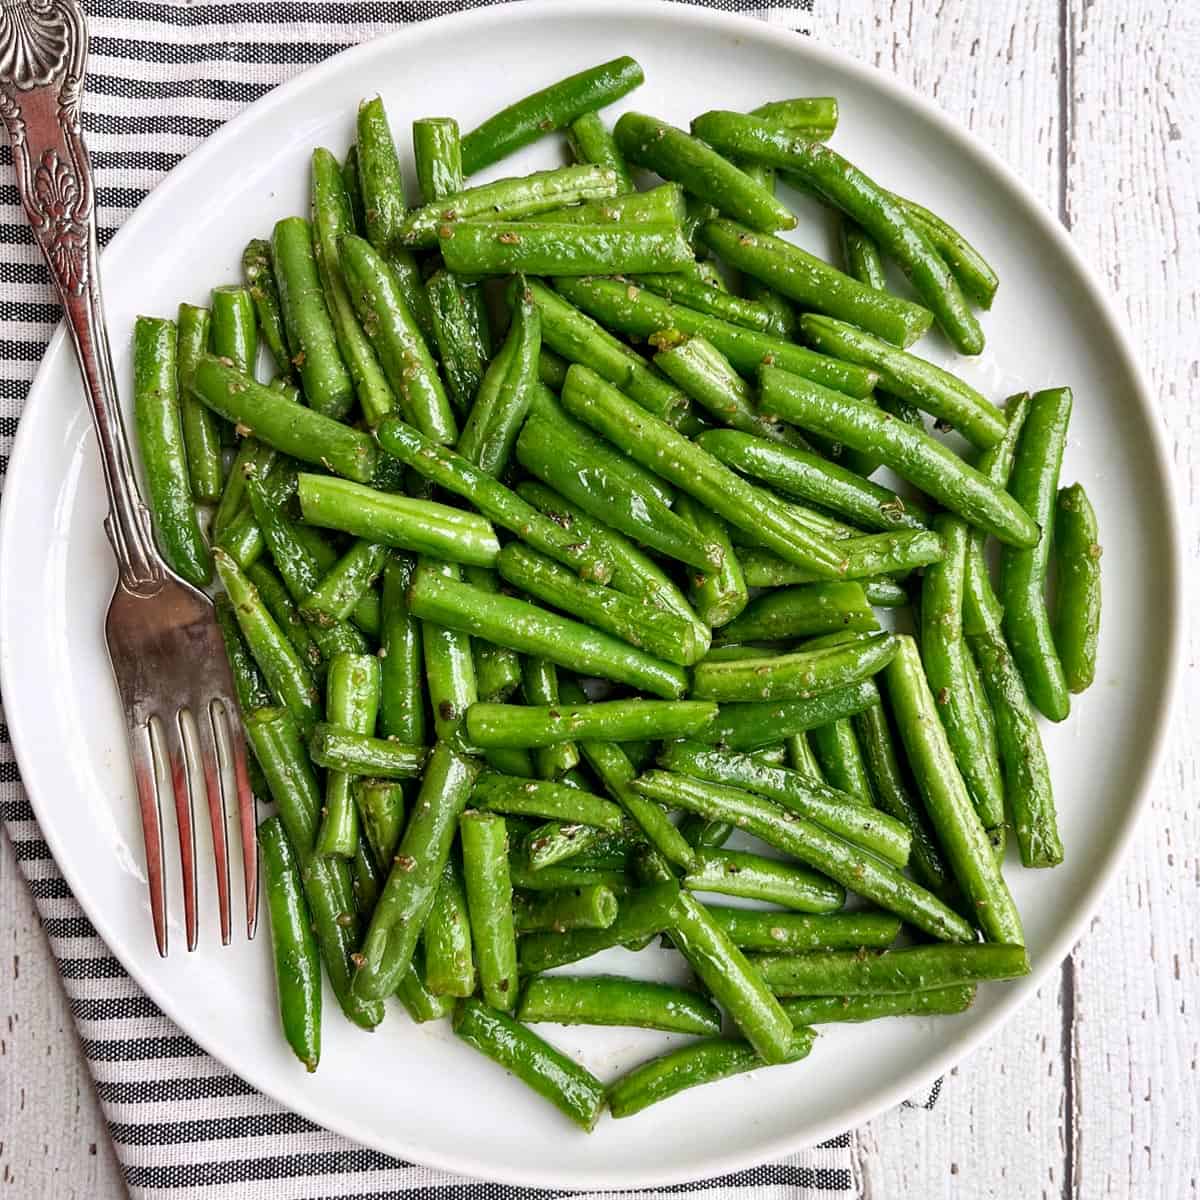 Sauteed green beans that were cut into bite-size pieces.